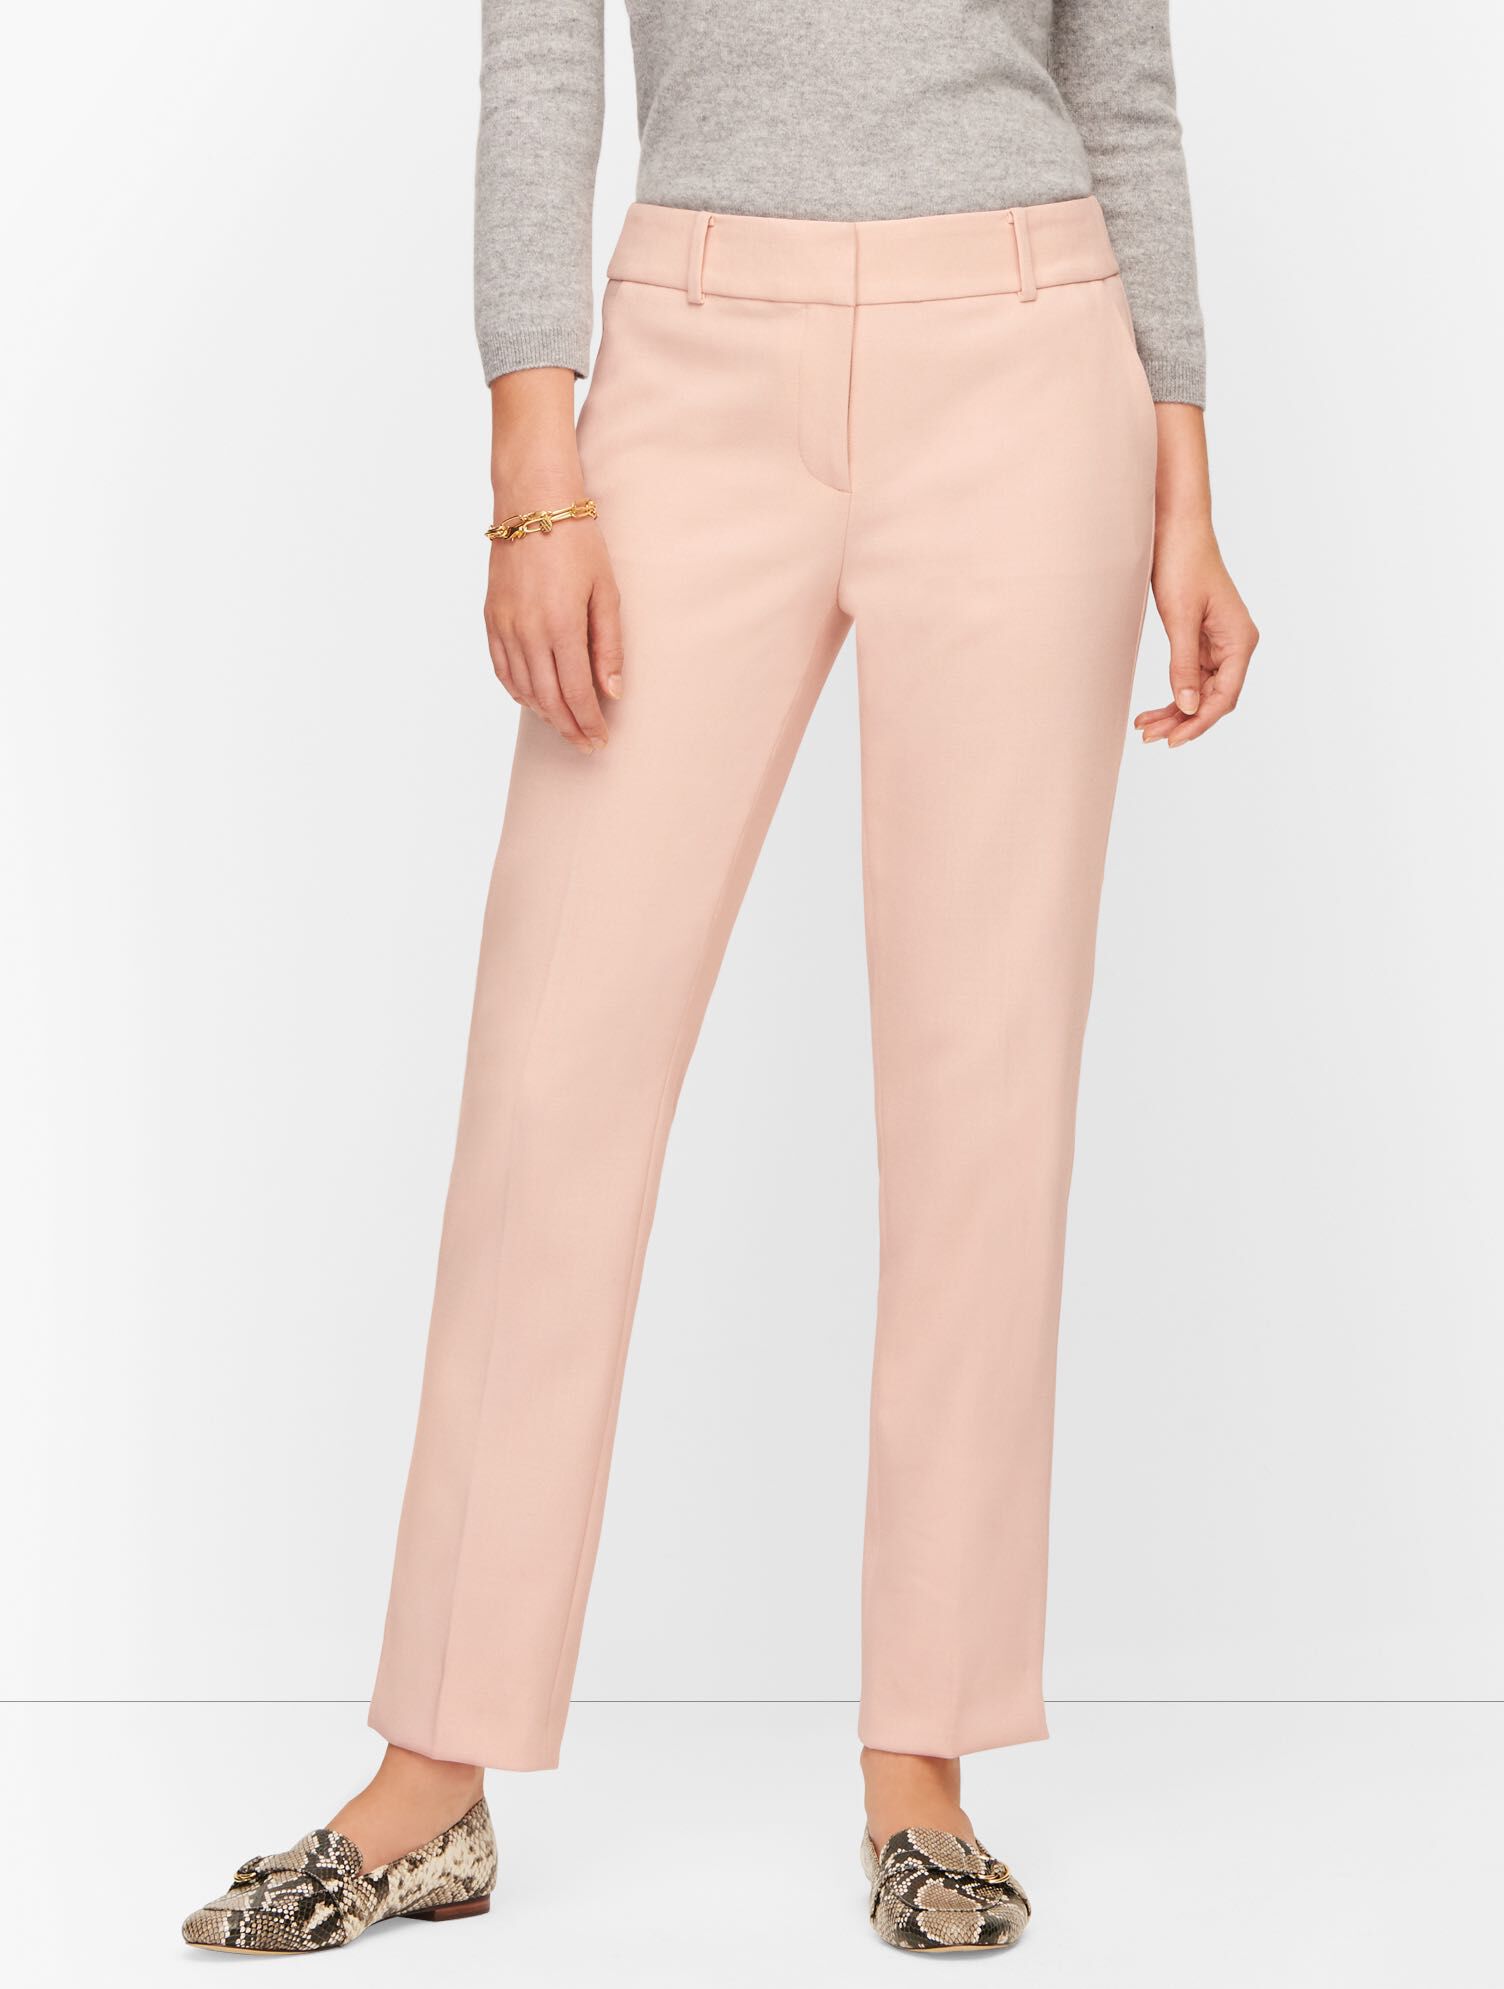 Talbots Hampshire Ankle Pants - Curvy Fit - Lined Ivory